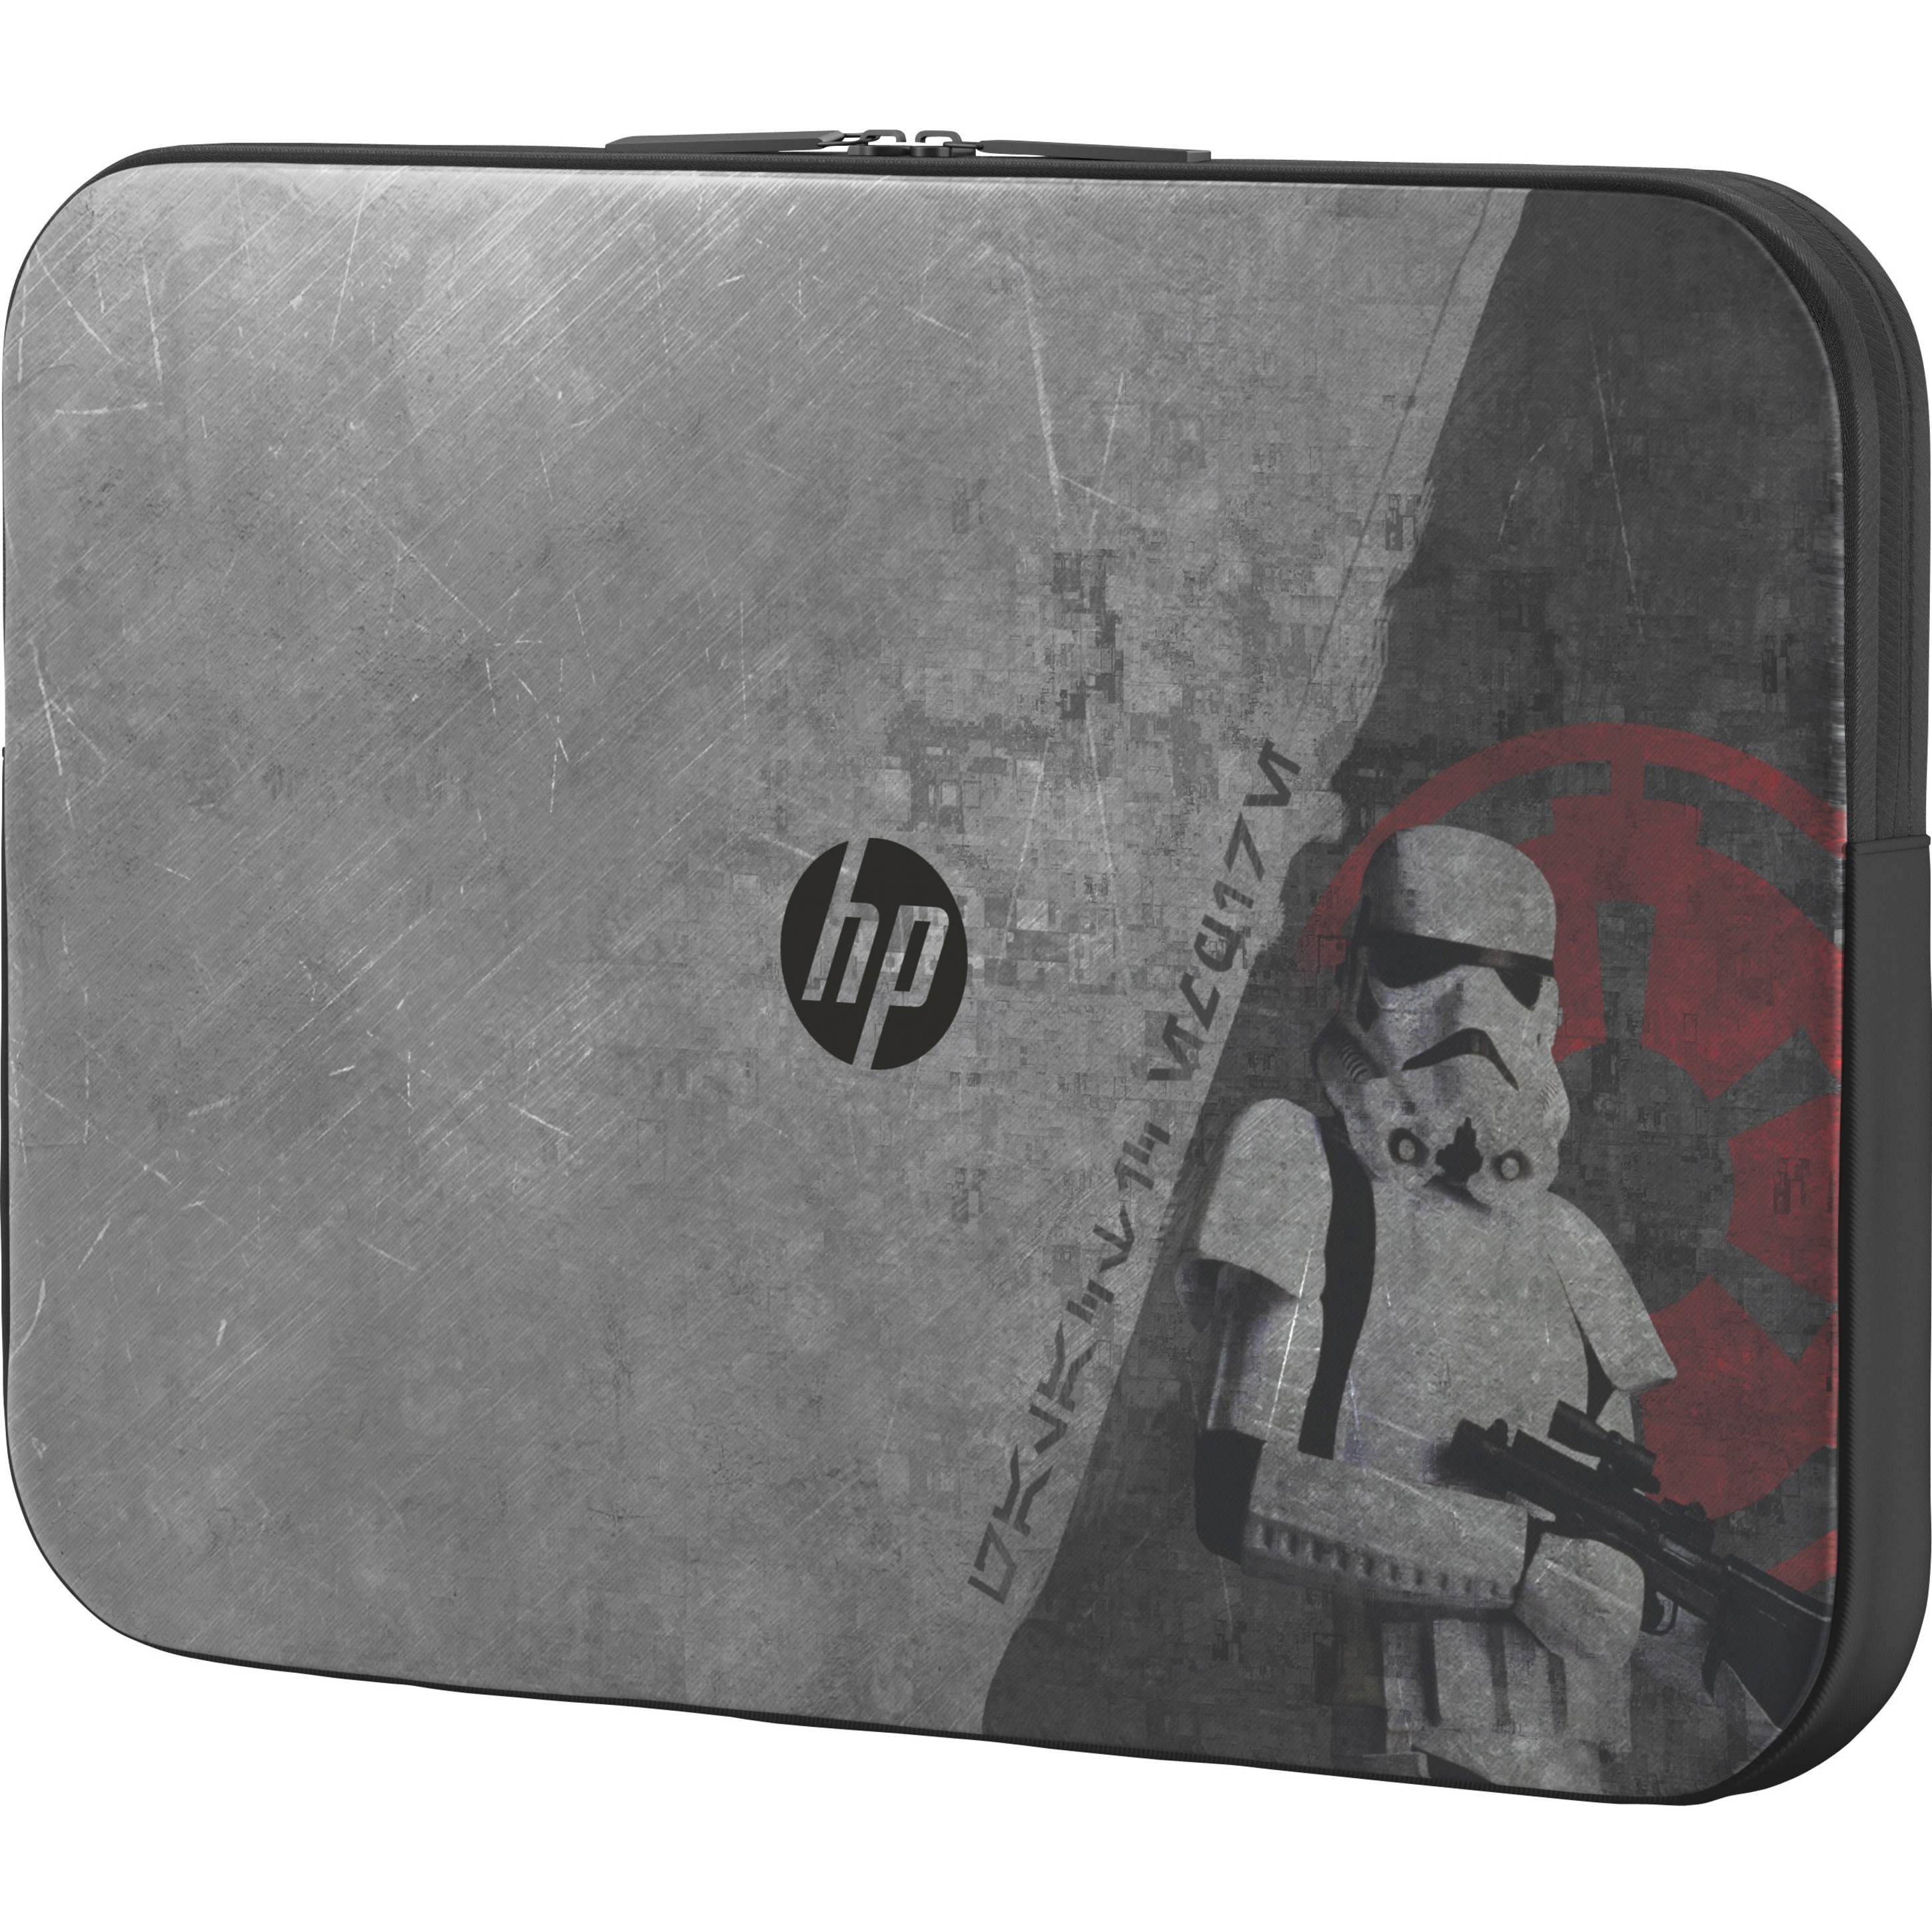 HP Star Wars Special Edition Sleeve, Fits Most Laptops Up to 15.6" - image 1 of 3